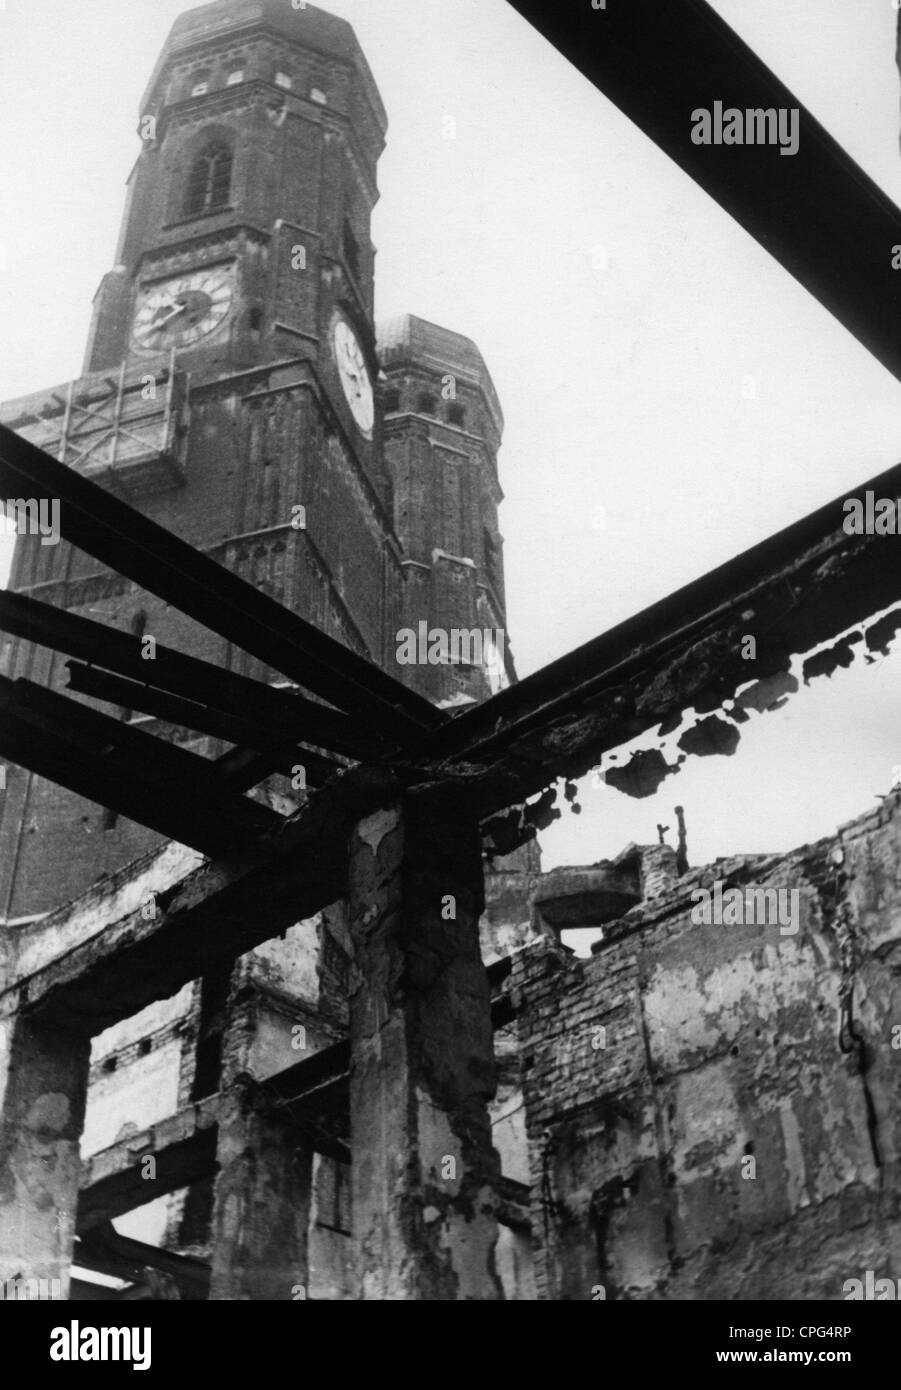 post war period, destroyed cities, Germany, Munich, Frauenkirche (Church of Our Lady), 1945 / 1946, Additional-Rights-Clearences-Not Available Stock Photo